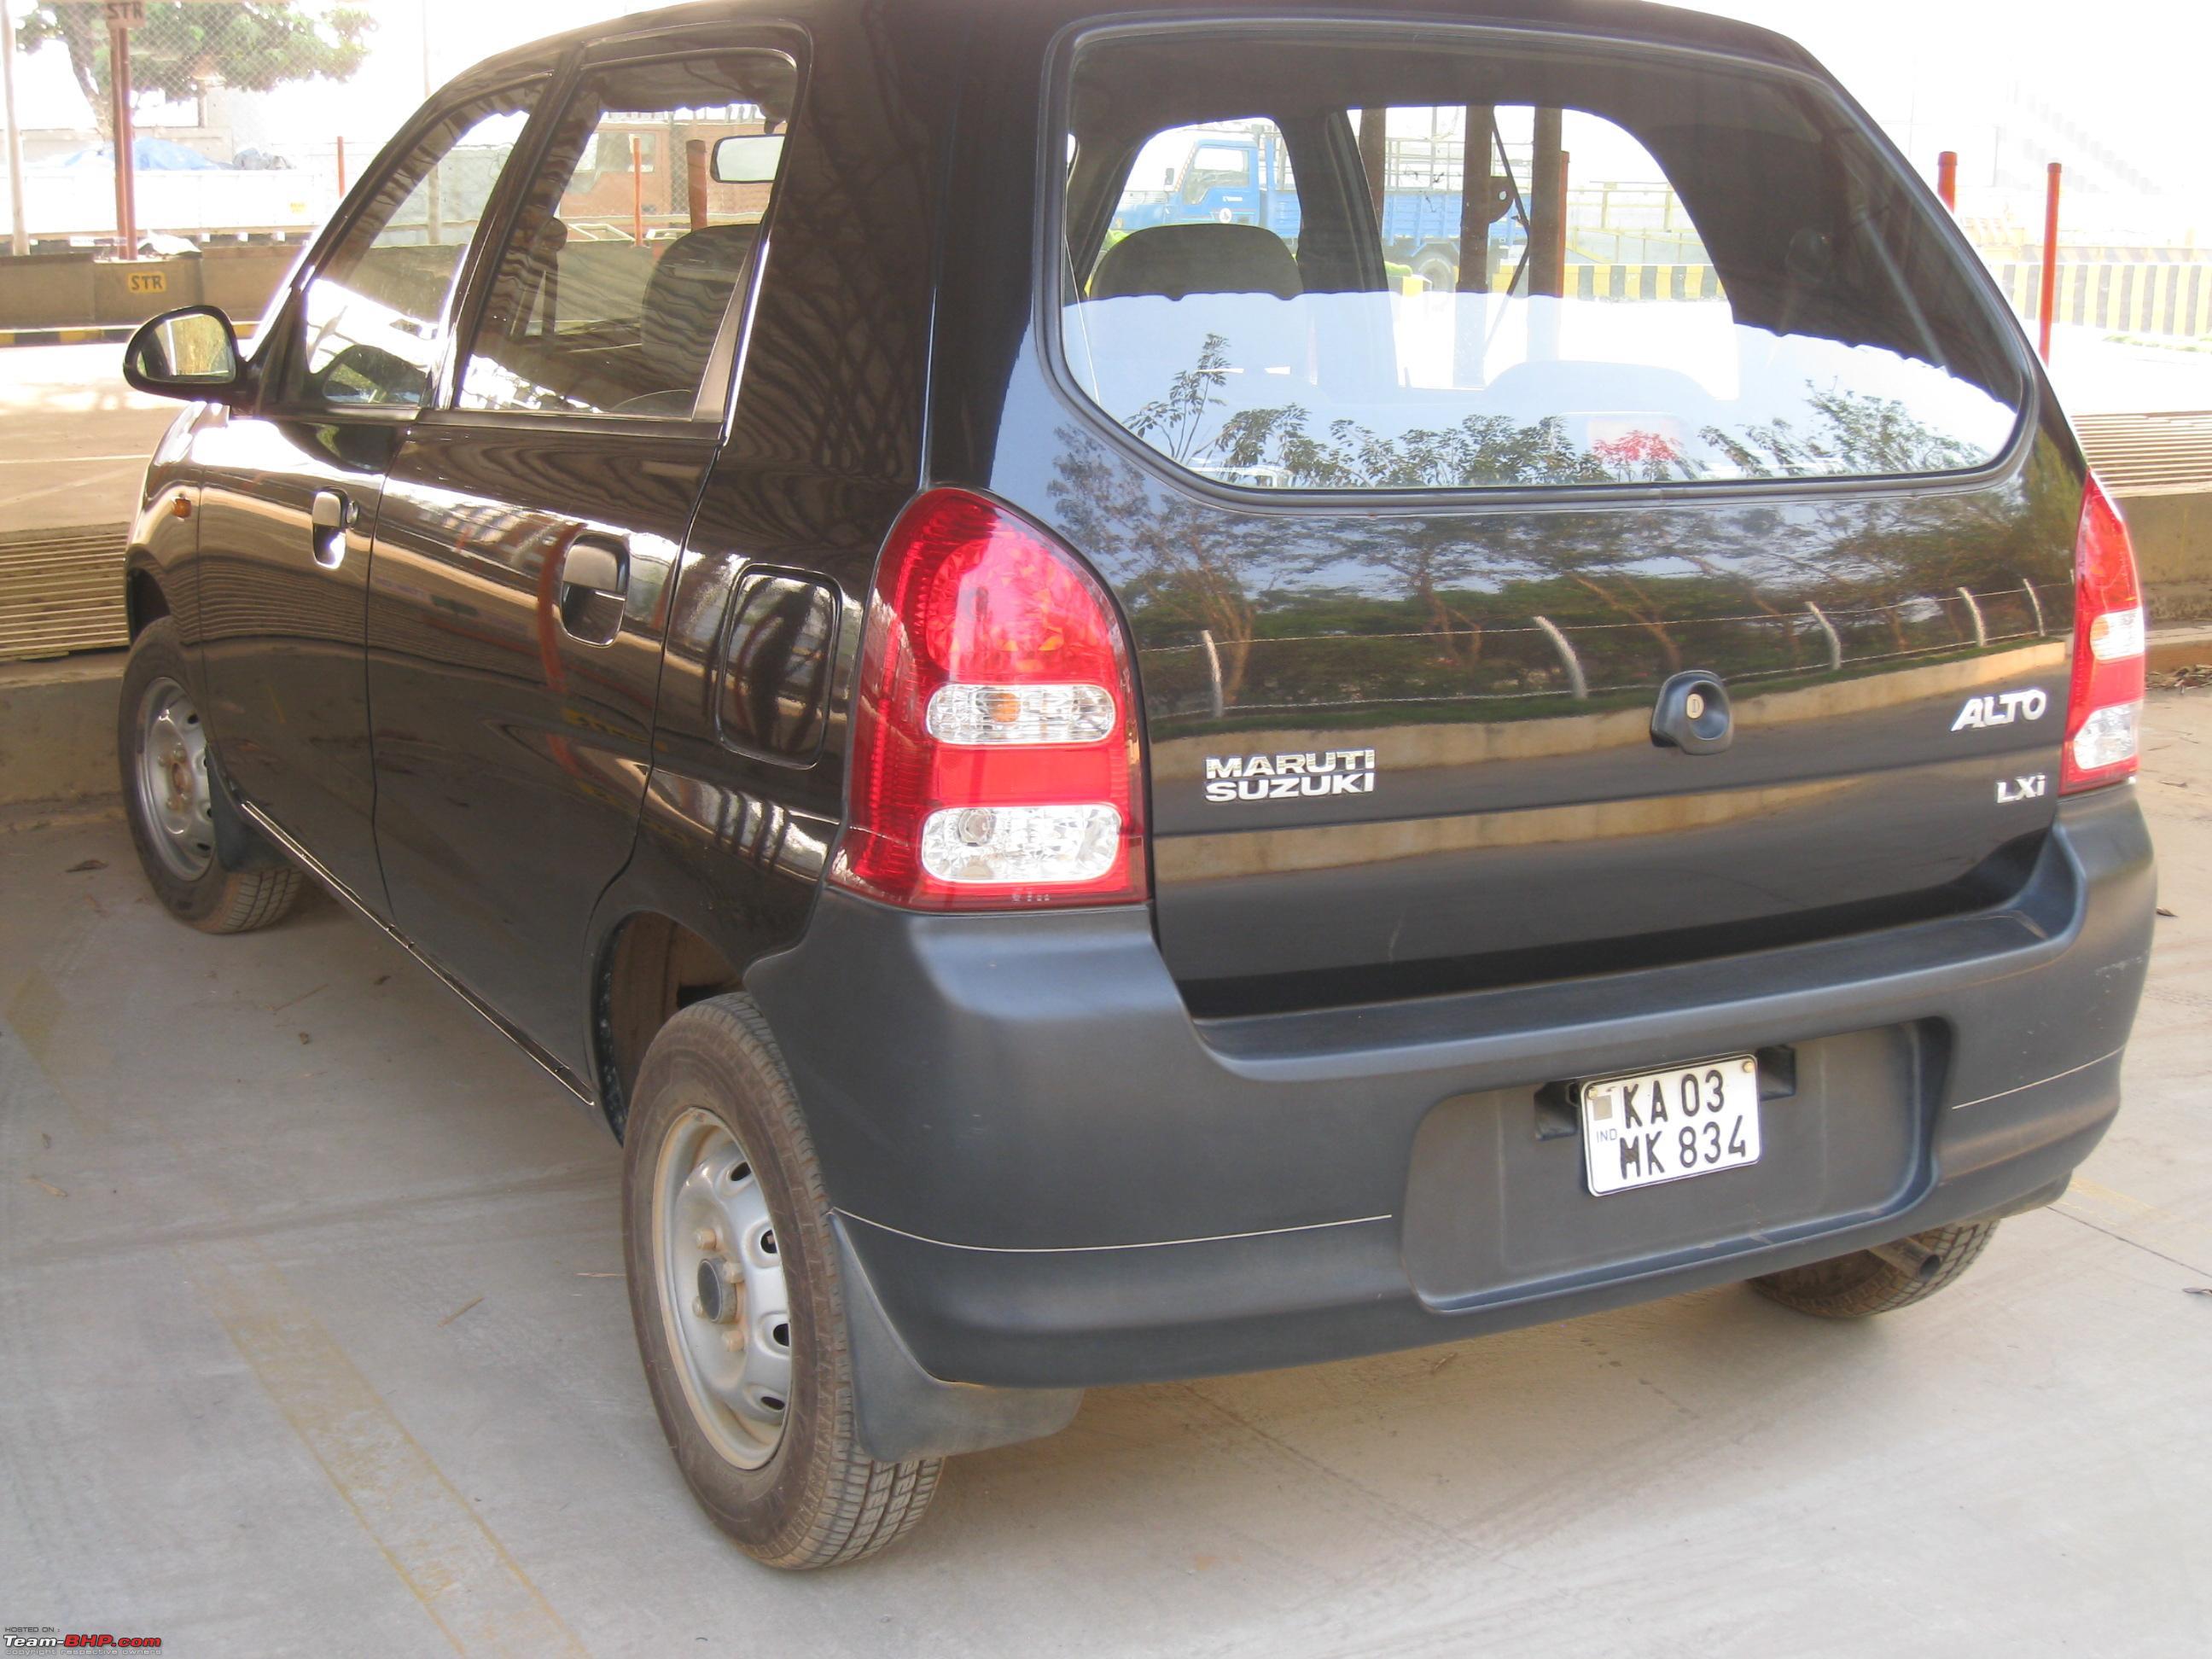 High security registration plates (HSRP) in India - Page 12 - Team-BHP